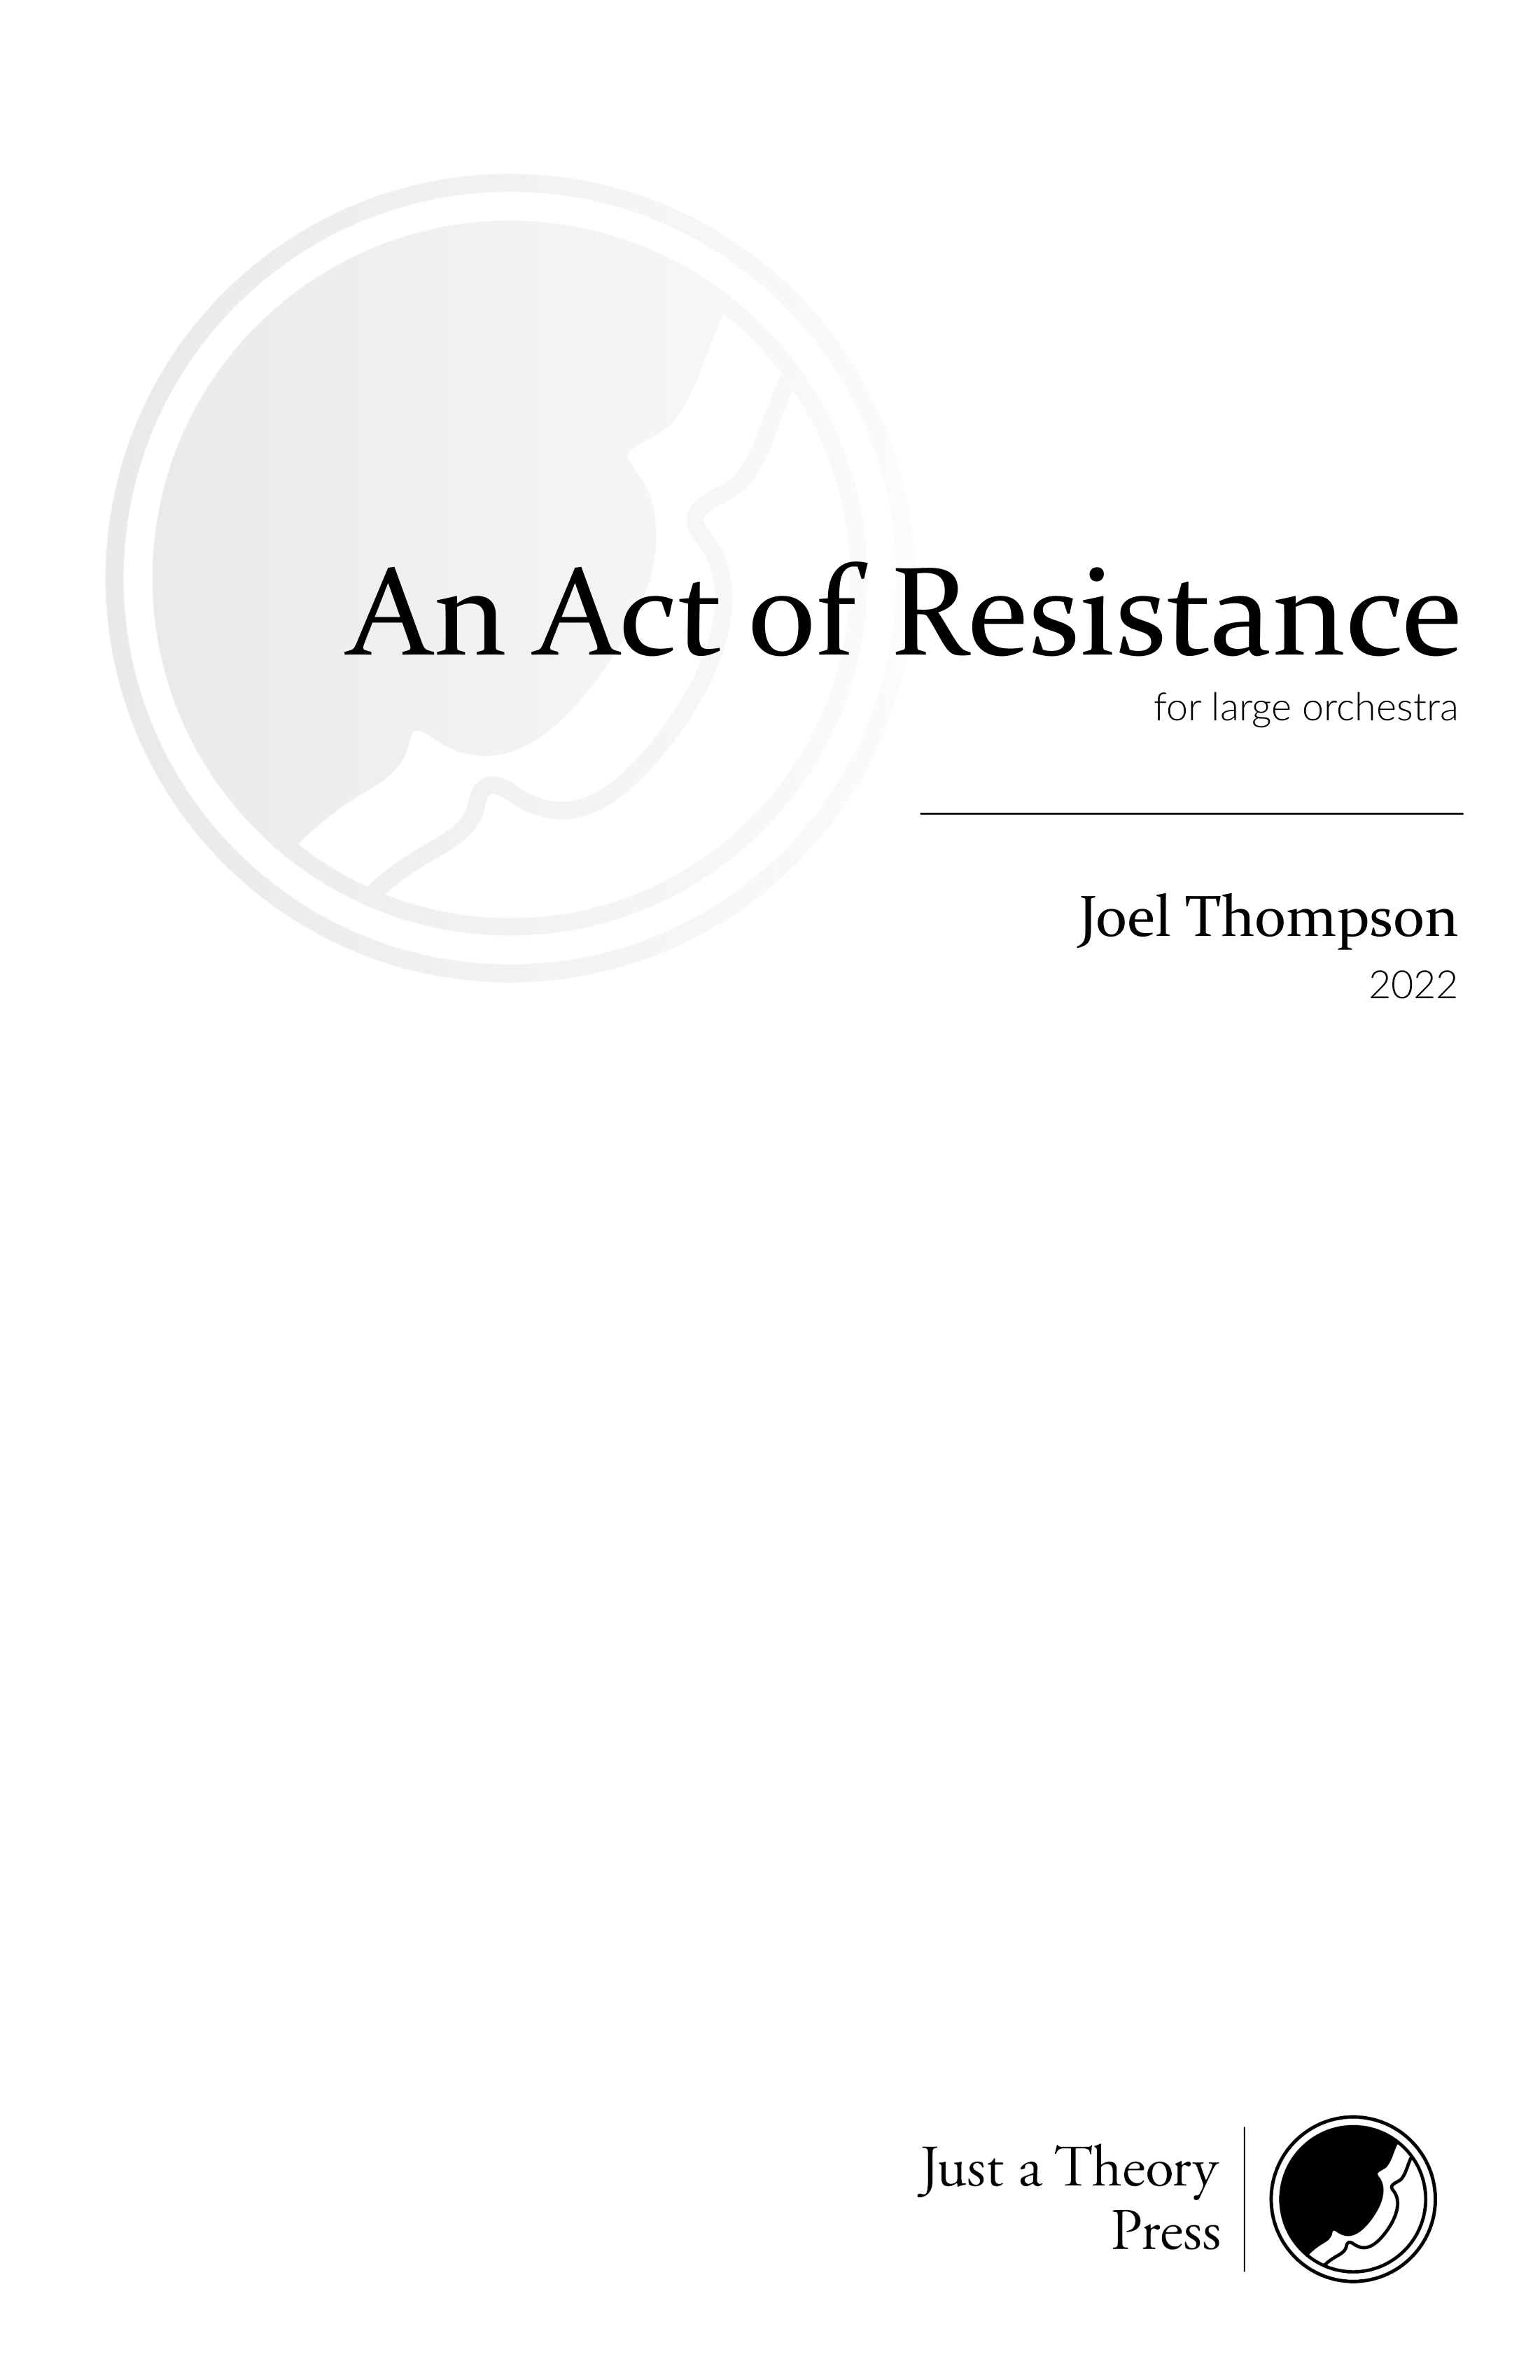 An Act of Resistance